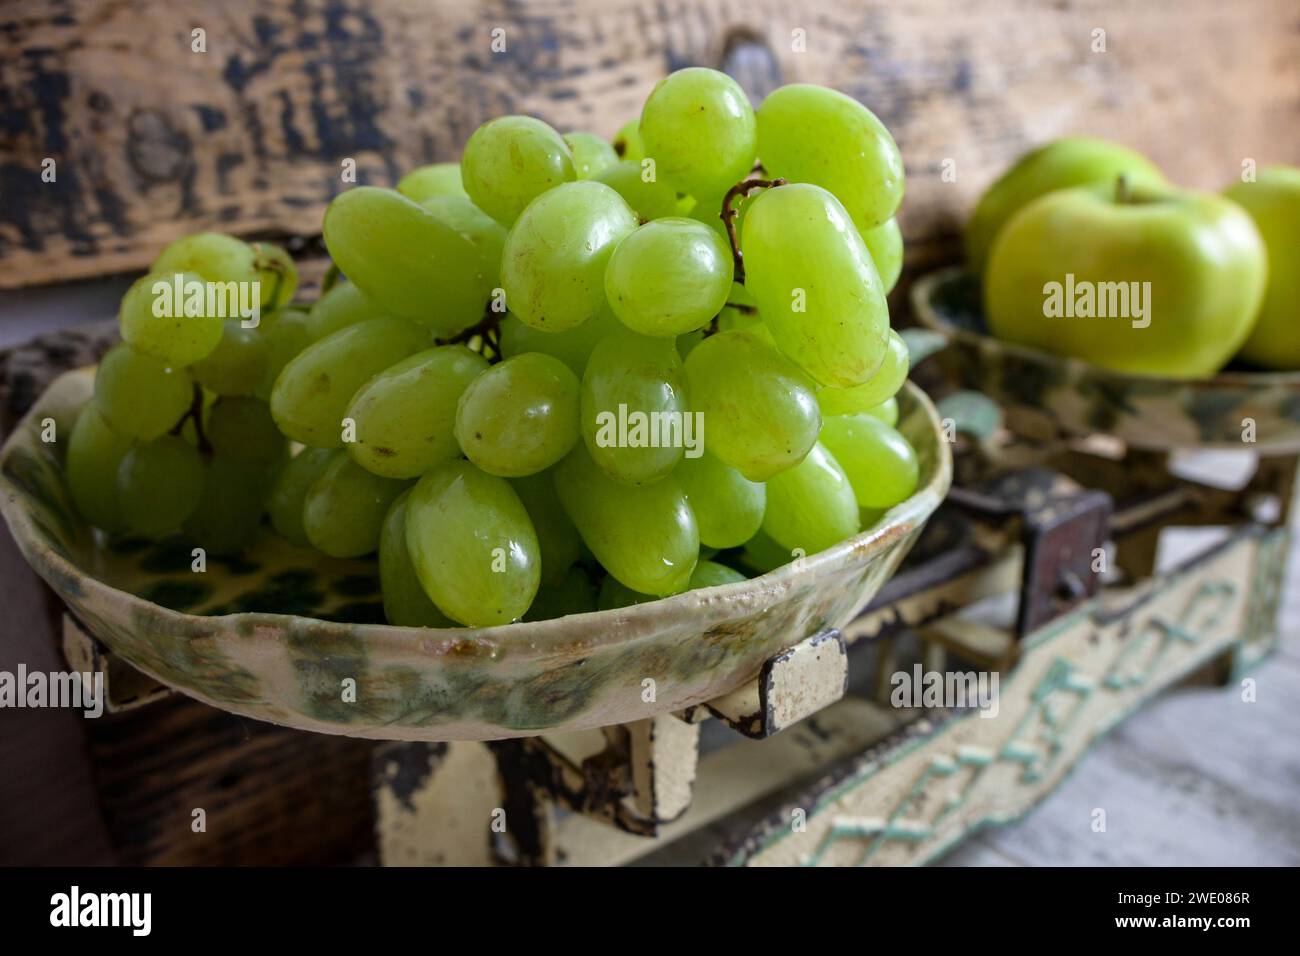 green grapes and apples on a retro scale, wooden background. Stock Photo